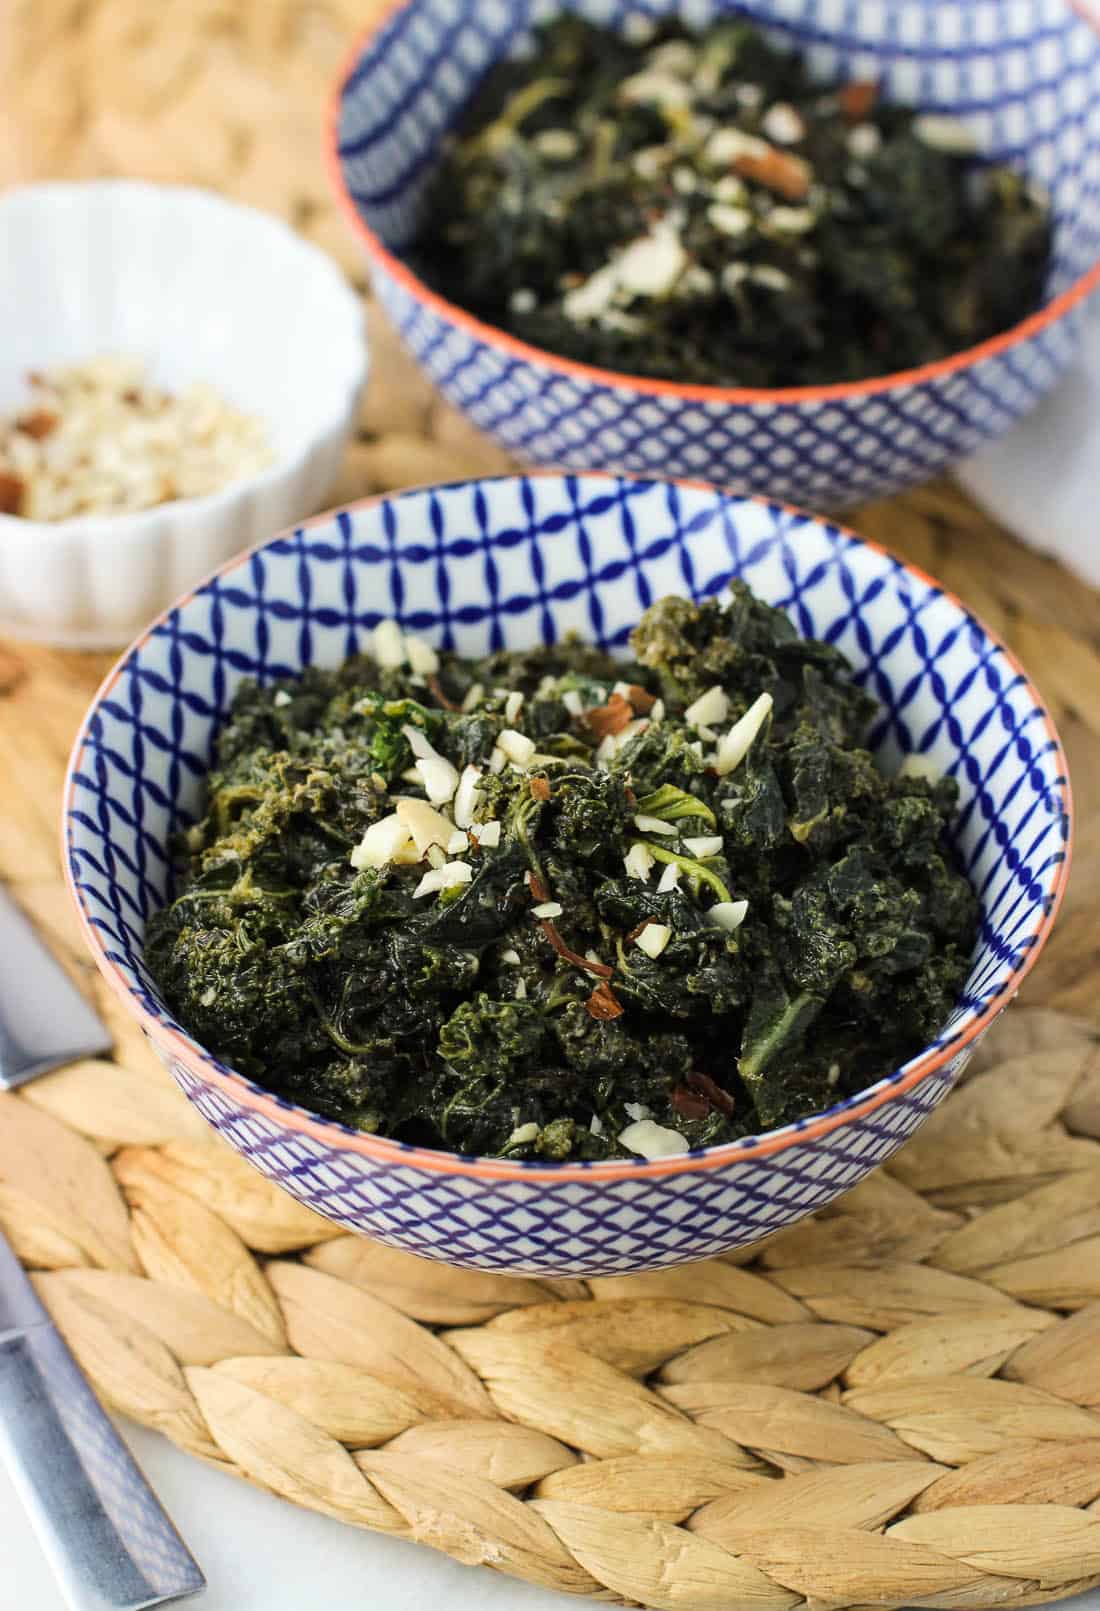 Two bowls of sauteed kale topped with sliced almonds on a woven placemat